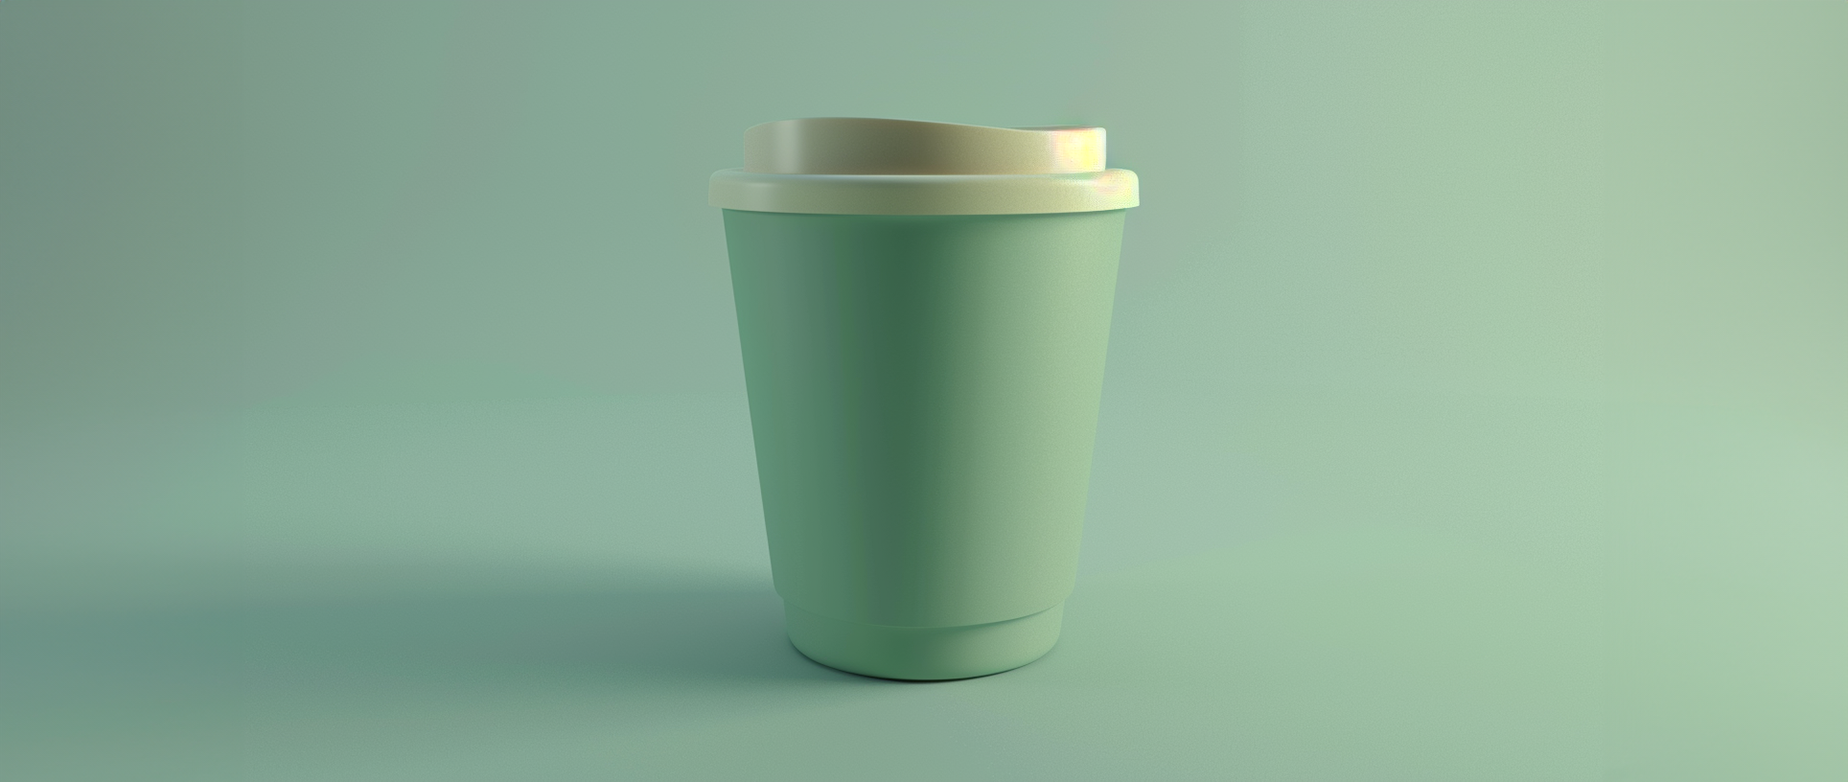 A green togo coffee cup on a light green background.